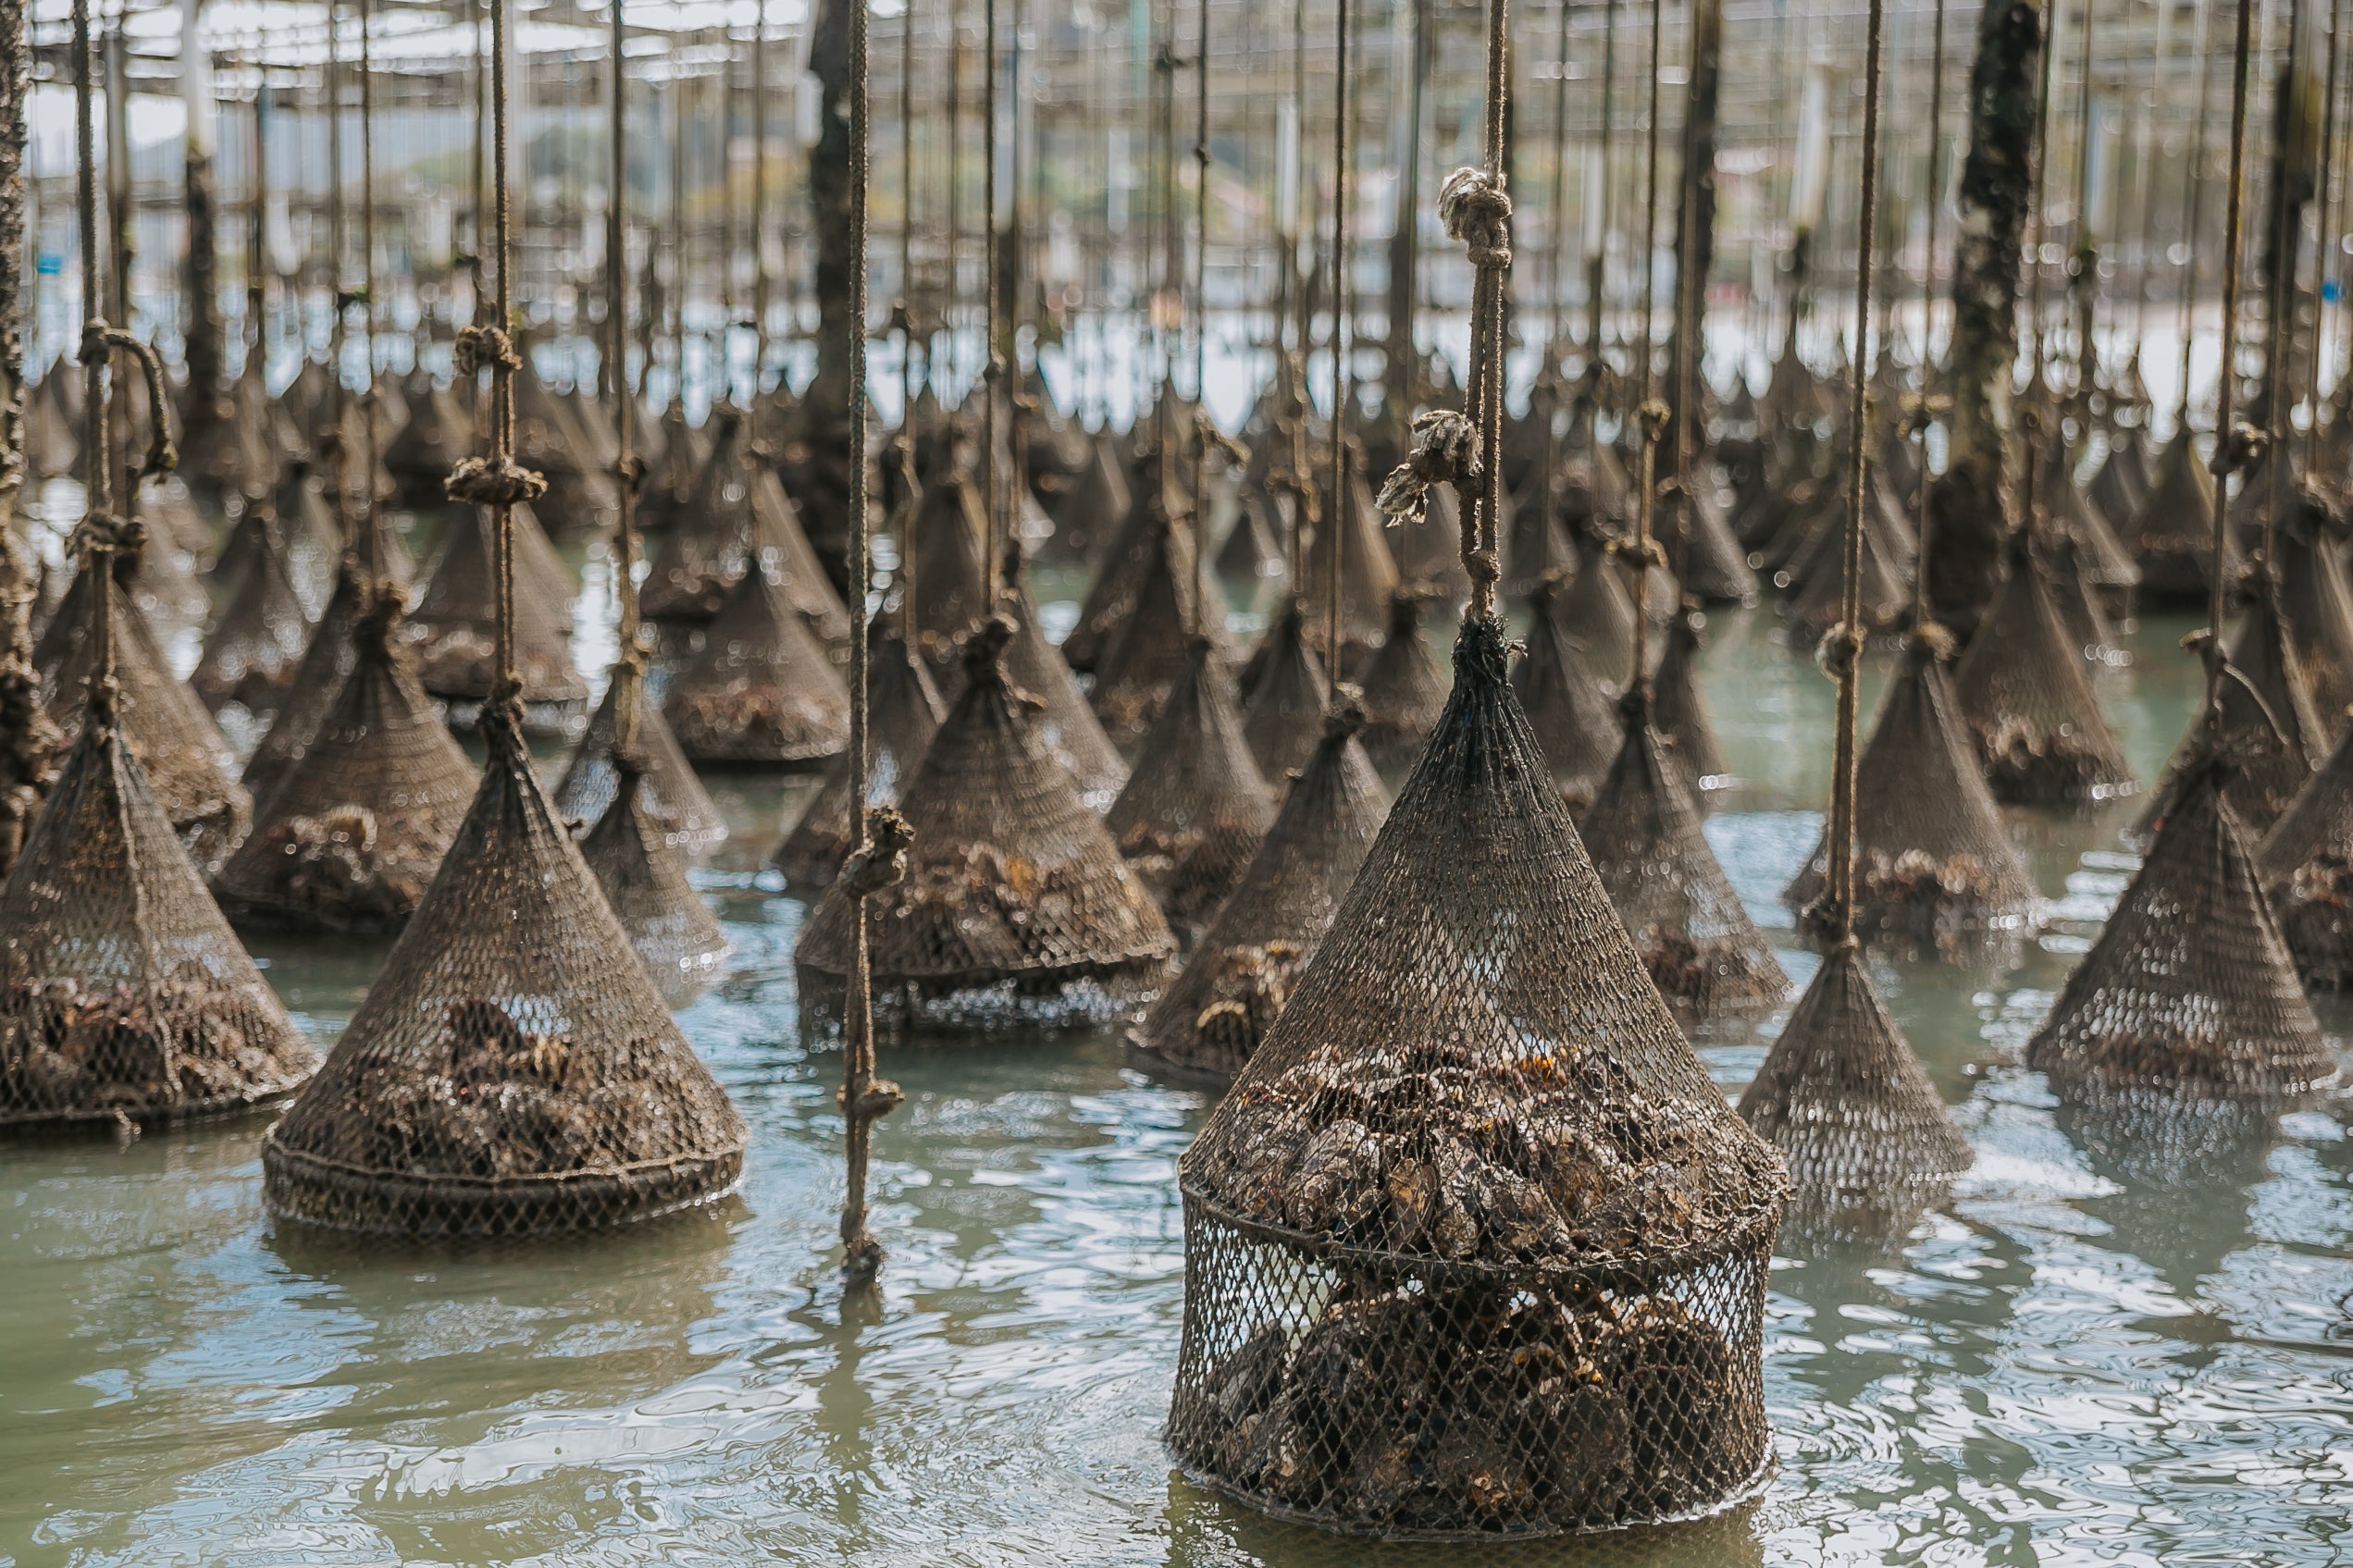 Oyster Farm Visit and Tasting